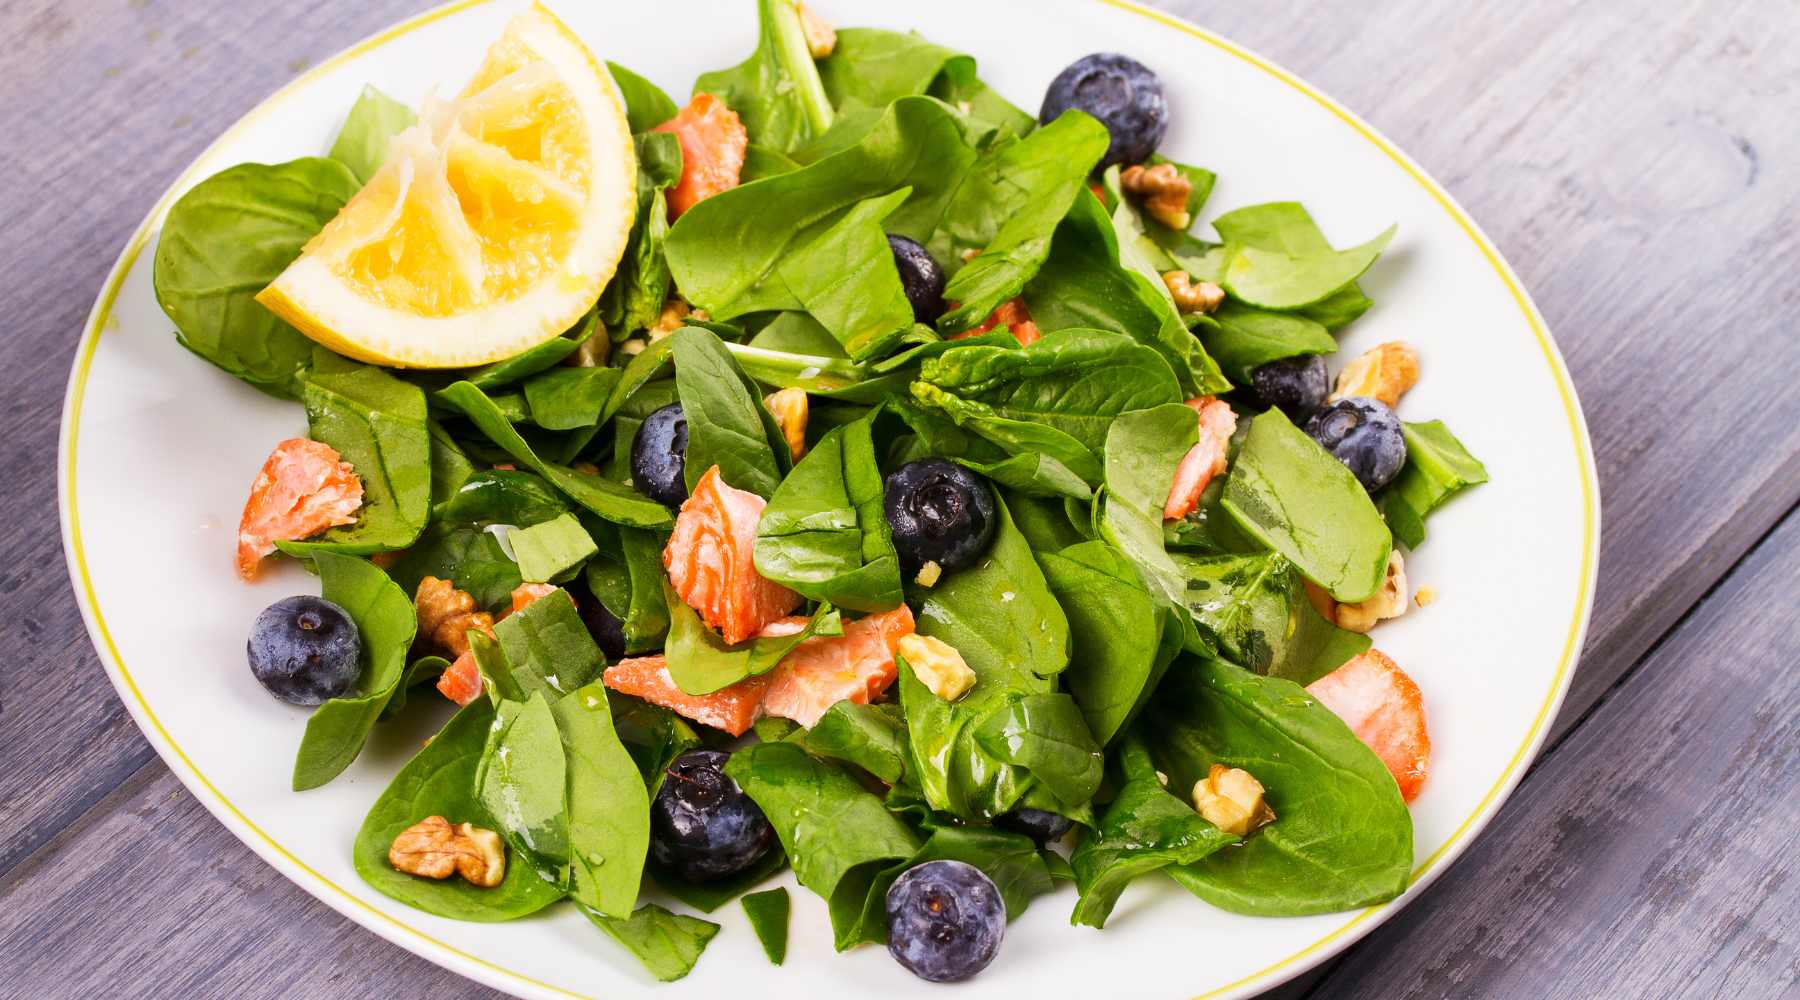 Spinach and Blueberries